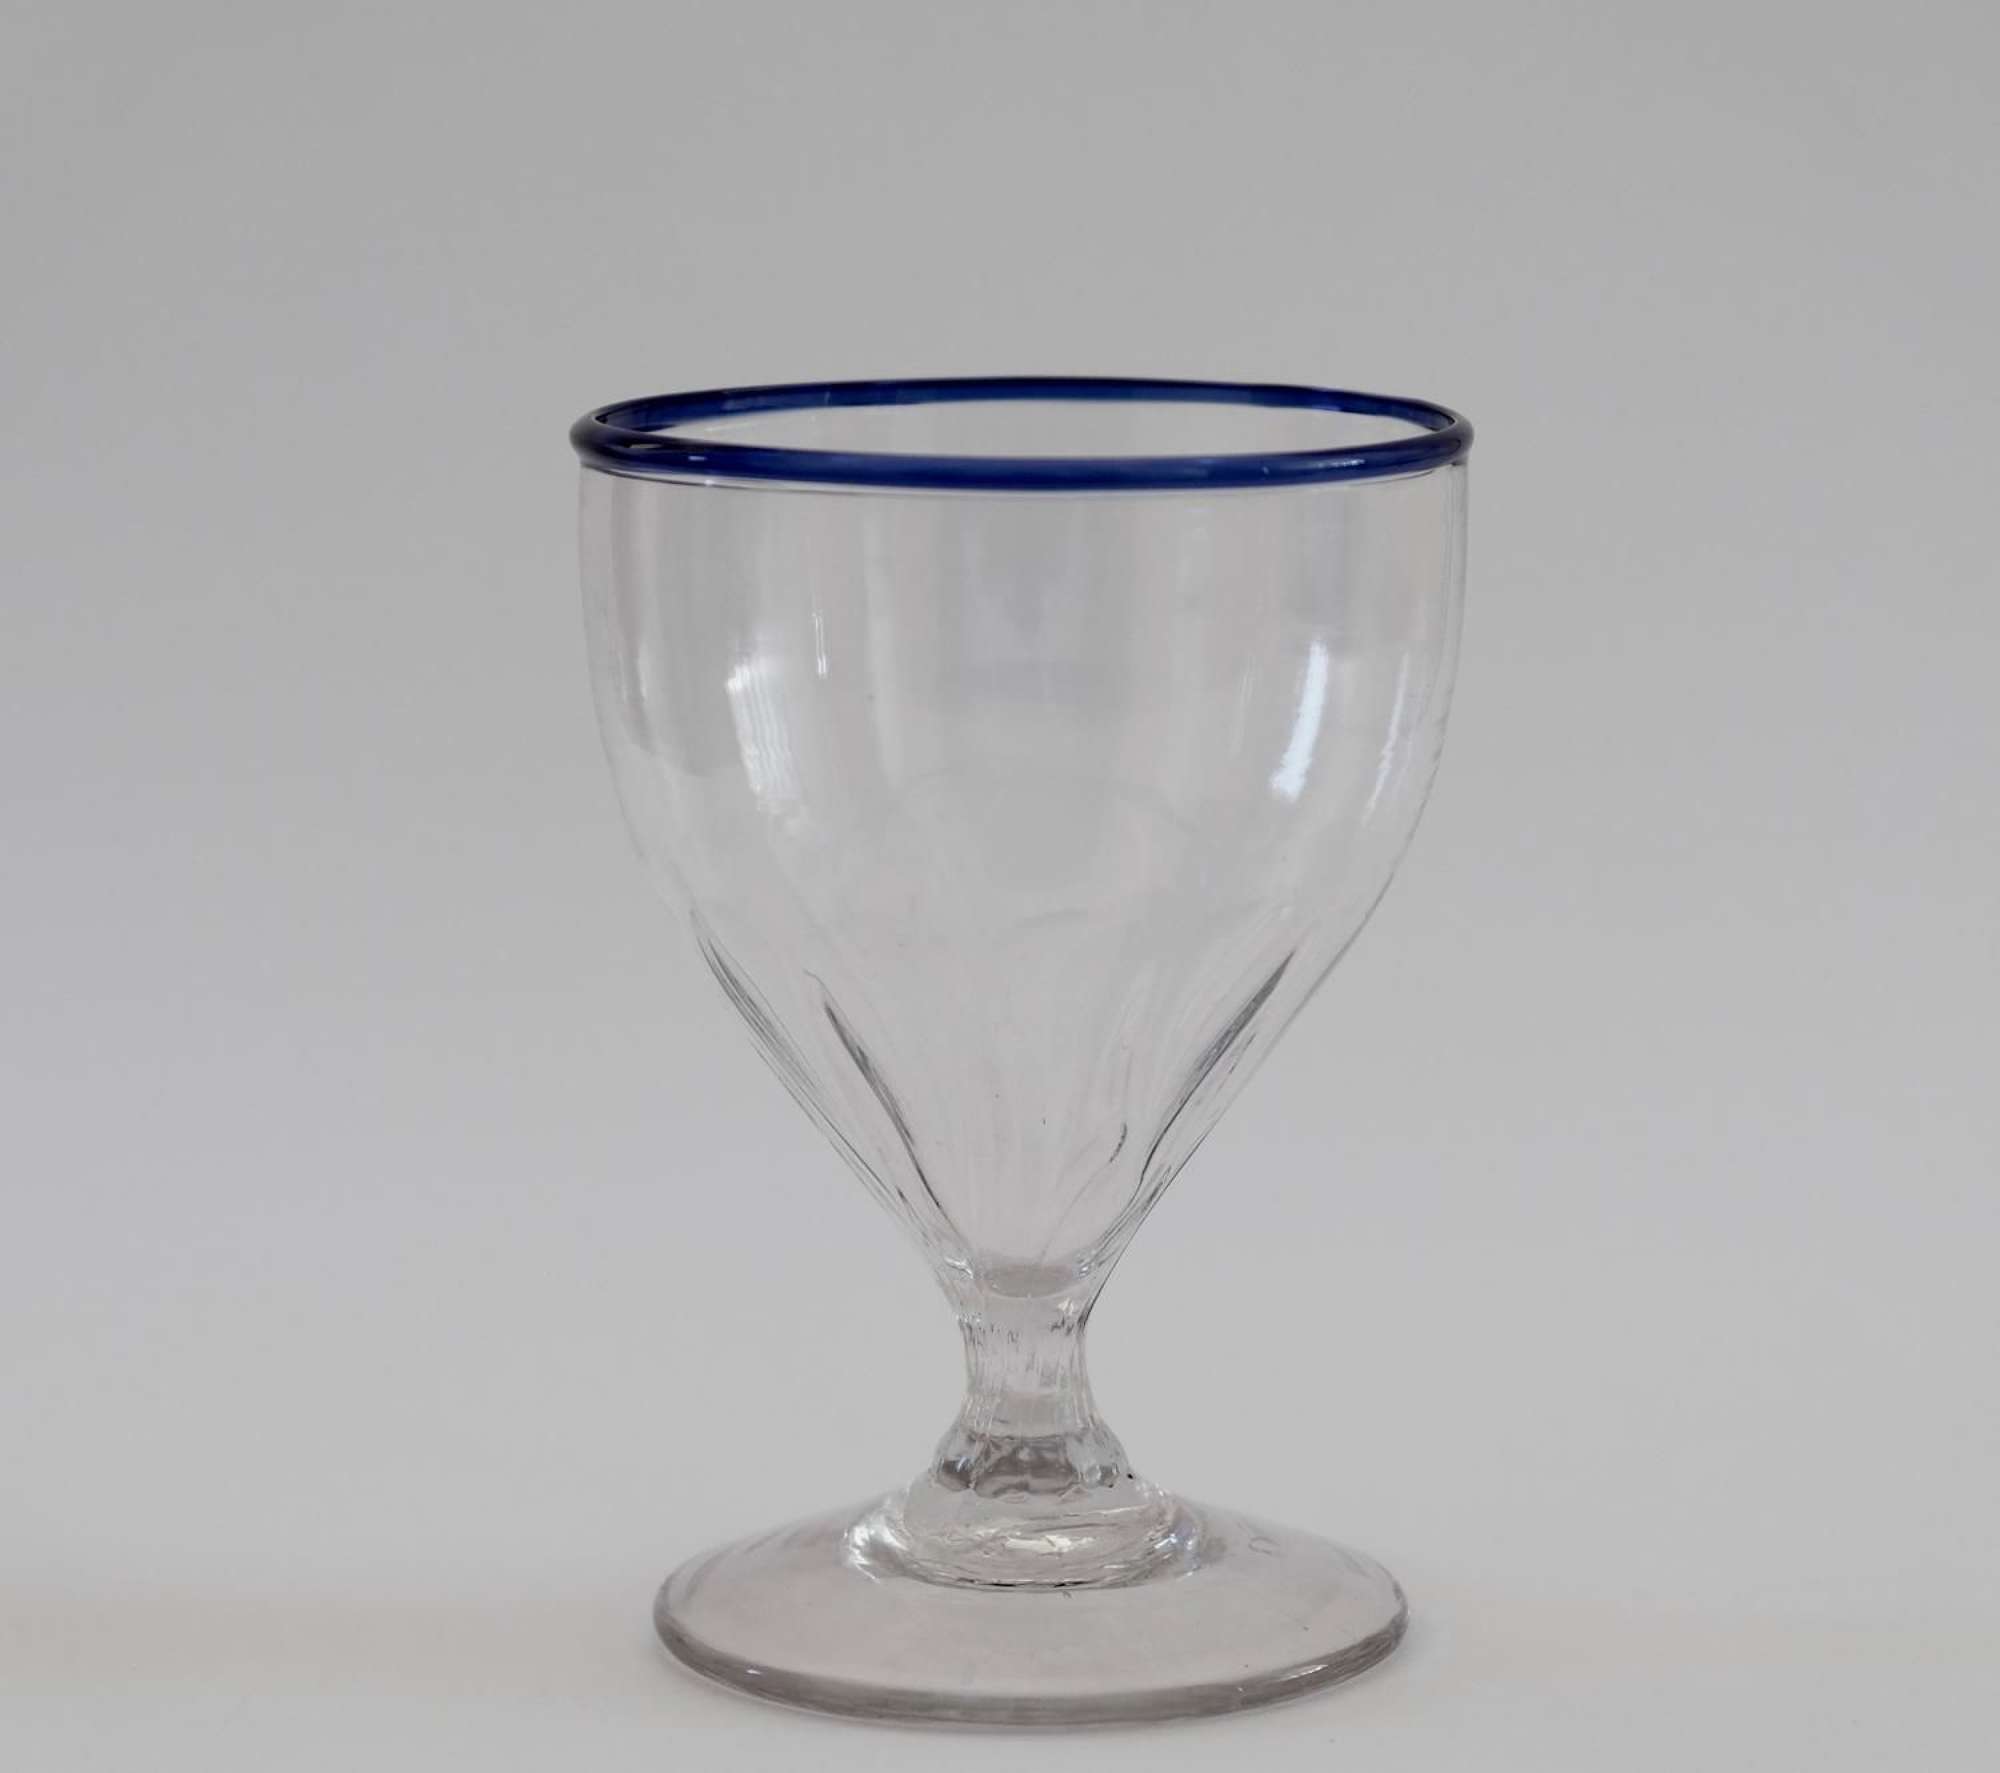 Antique glass - rummer with applied blue rim C1800